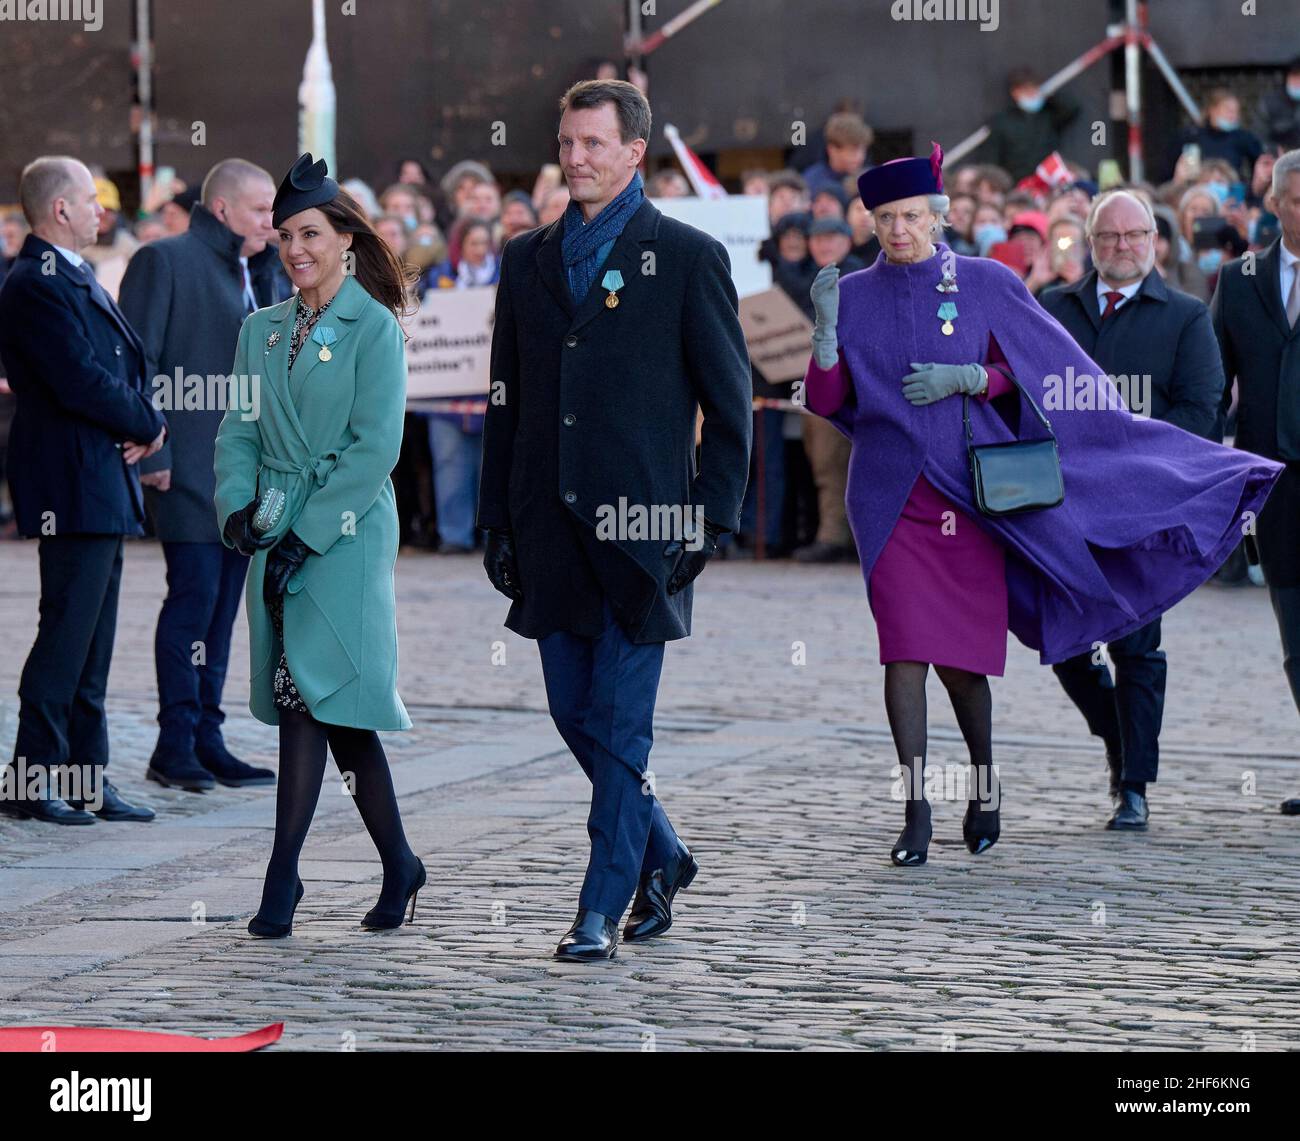 Roskilde, Denmark. 14th Jan, 2022. Prince Joachim, Princess Marie and Princess Benedikte during wreath-laying at Frederik 9's and Queen Ingrid's tomb at Roskilde Cathedral on the occasion of the 50th anniversary of Frederik 9's death and Queen Margrethe's 50th anniversary as regent. Photo by Stefan Lindblom/Stella Pictures/ABACAPRESS.COM Credit: Abaca Press/Alamy Live News Stock Photo